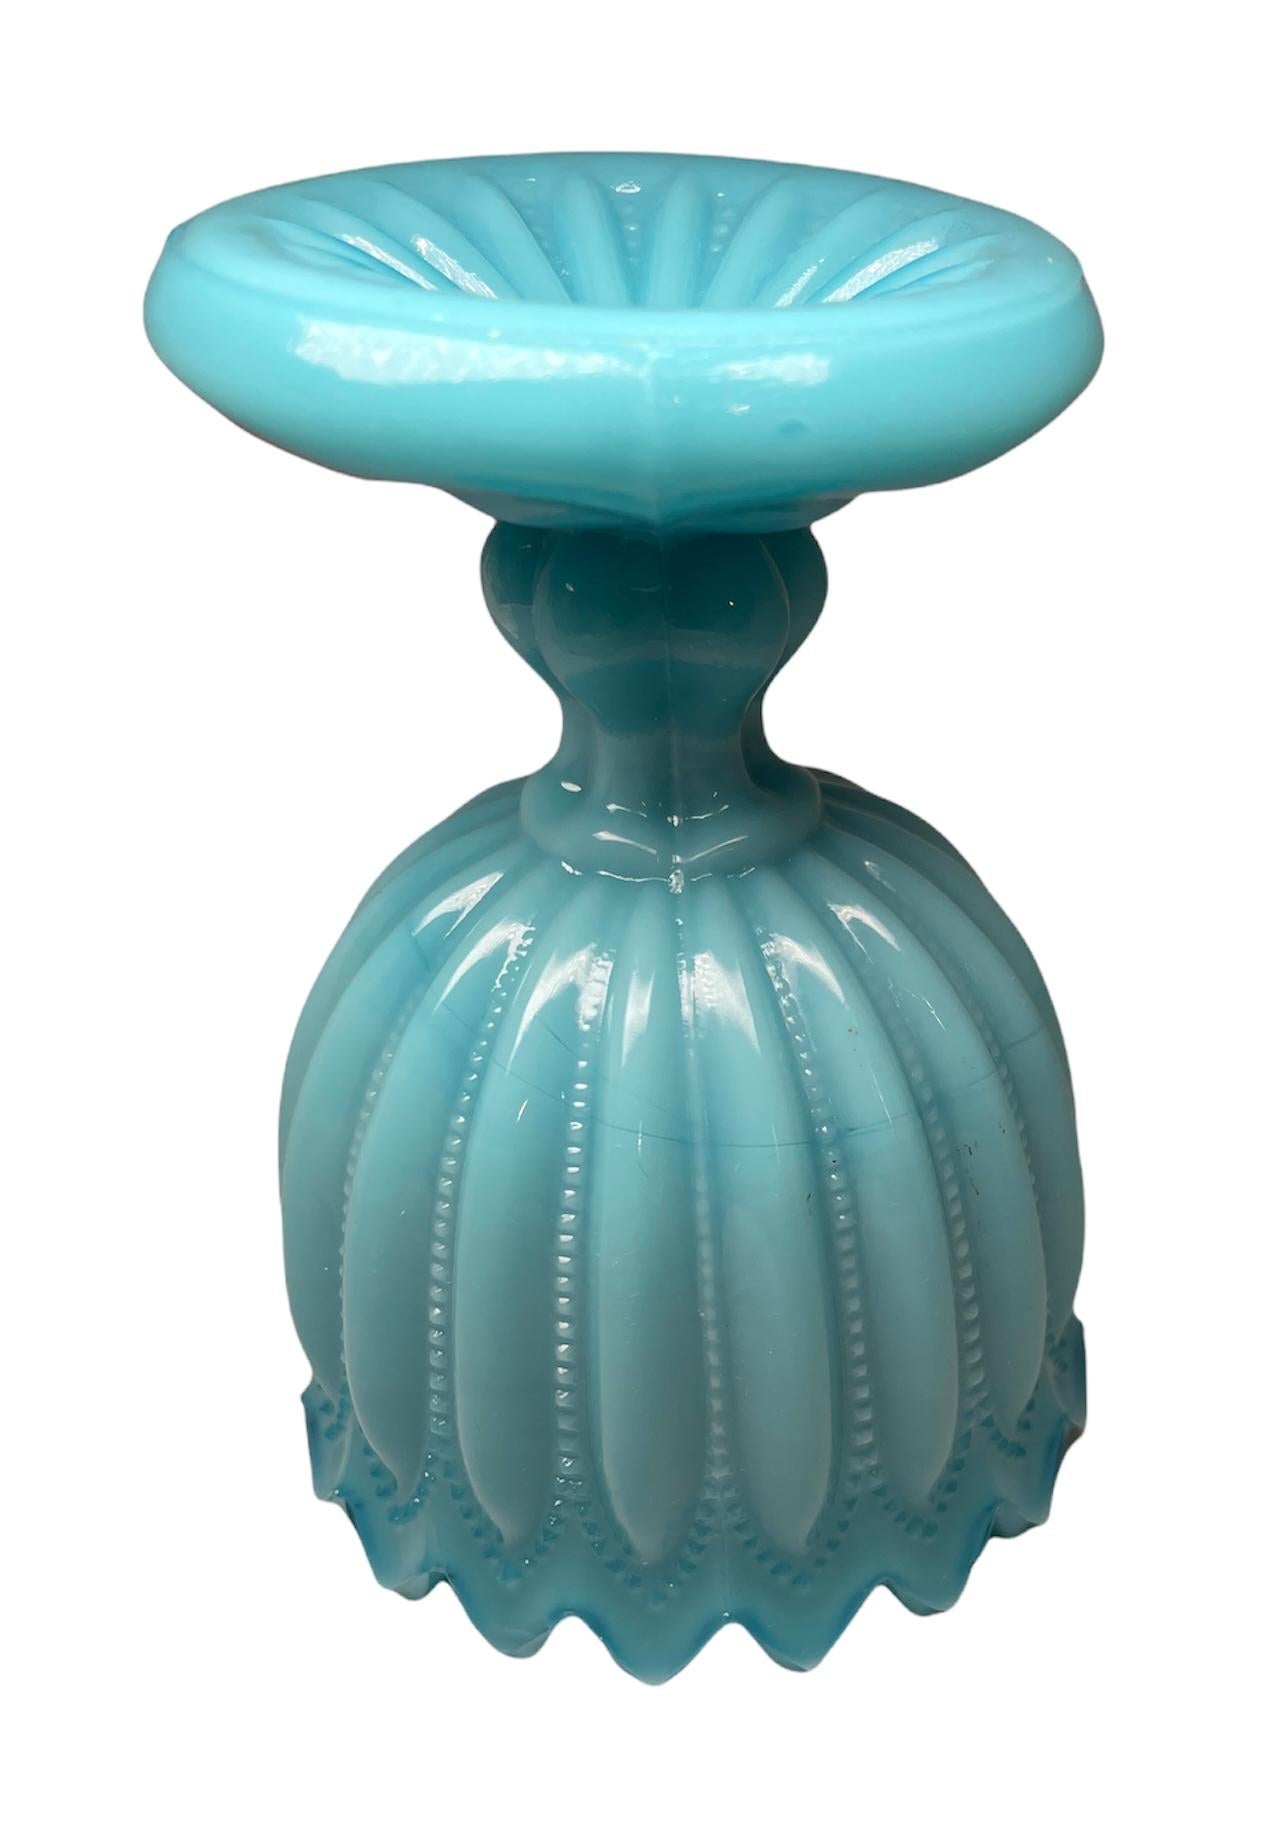 20th Century French Turquoise Opaline Milk Glass Goblet Vase